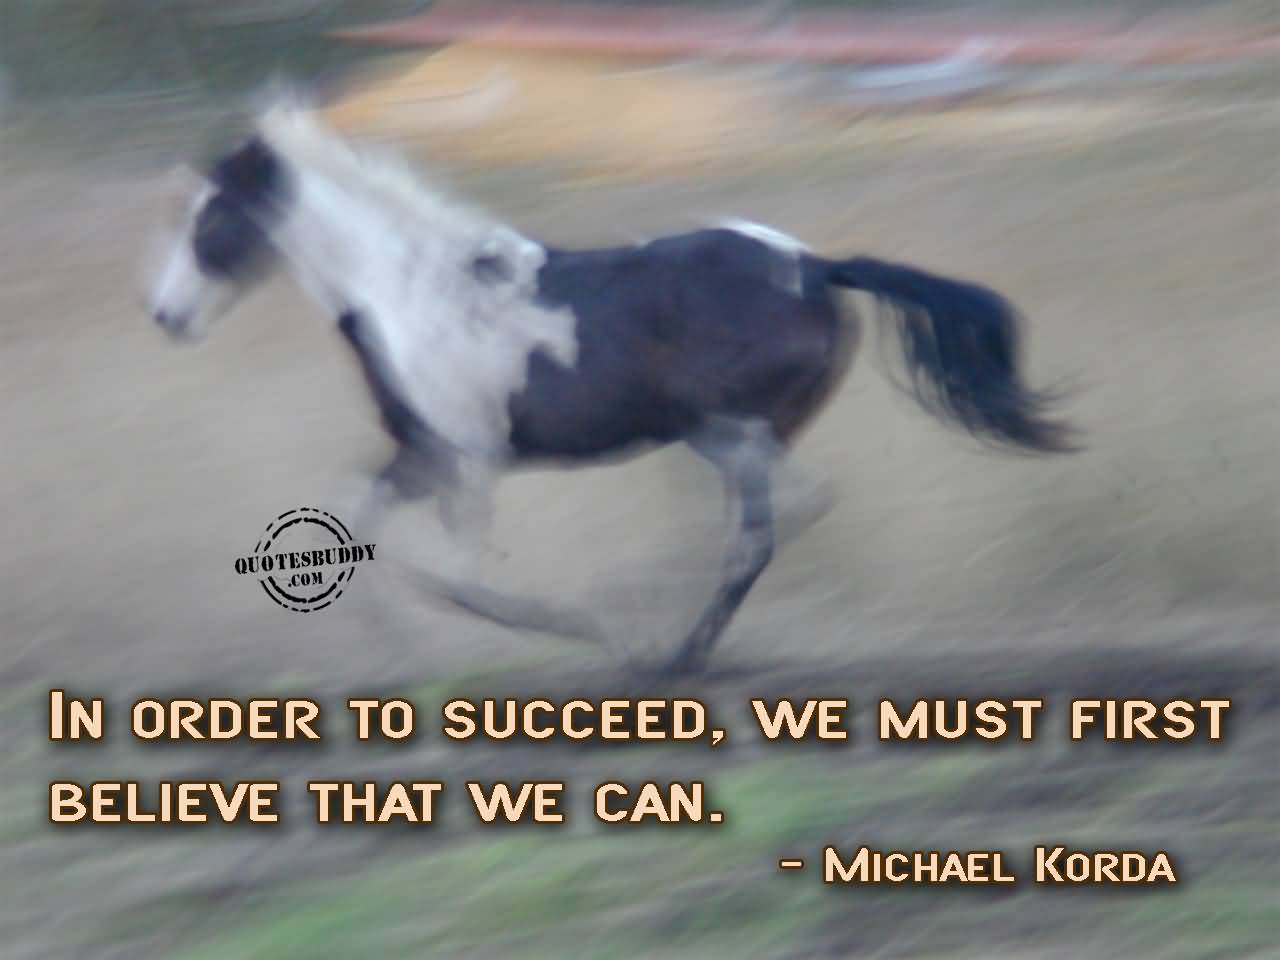 To succeed, we must first believe that we can.